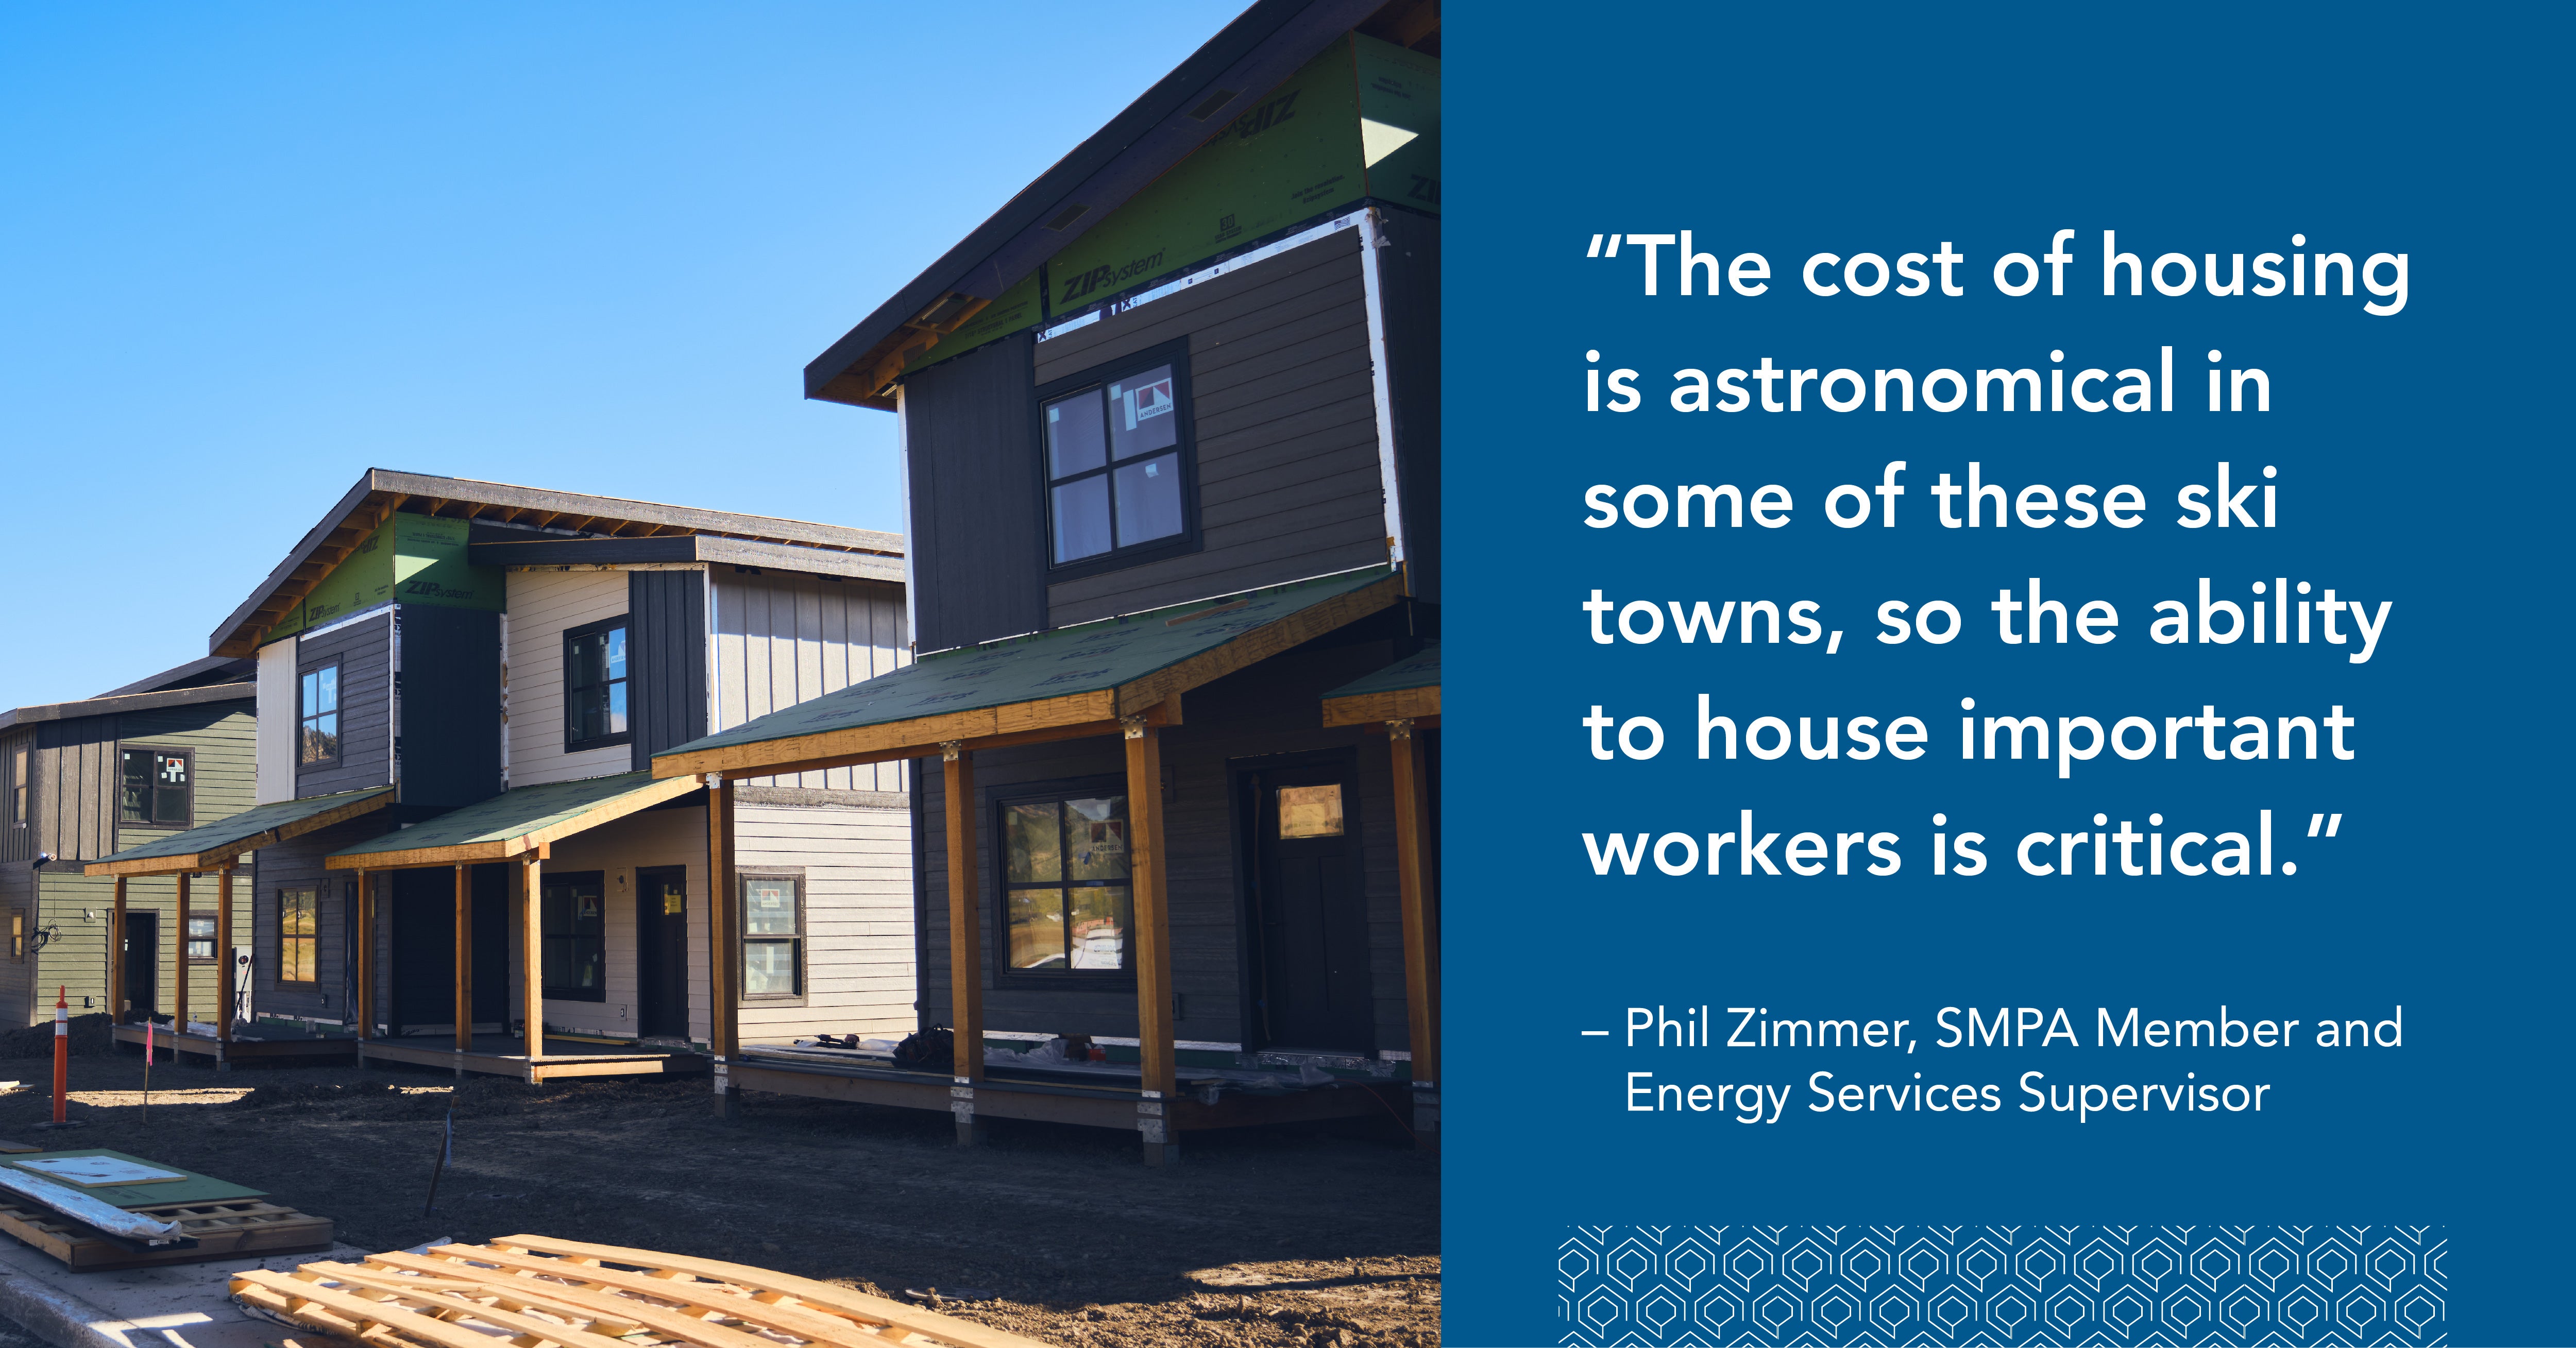 Affordable housing in Colorado Mountain towns, SMPA 